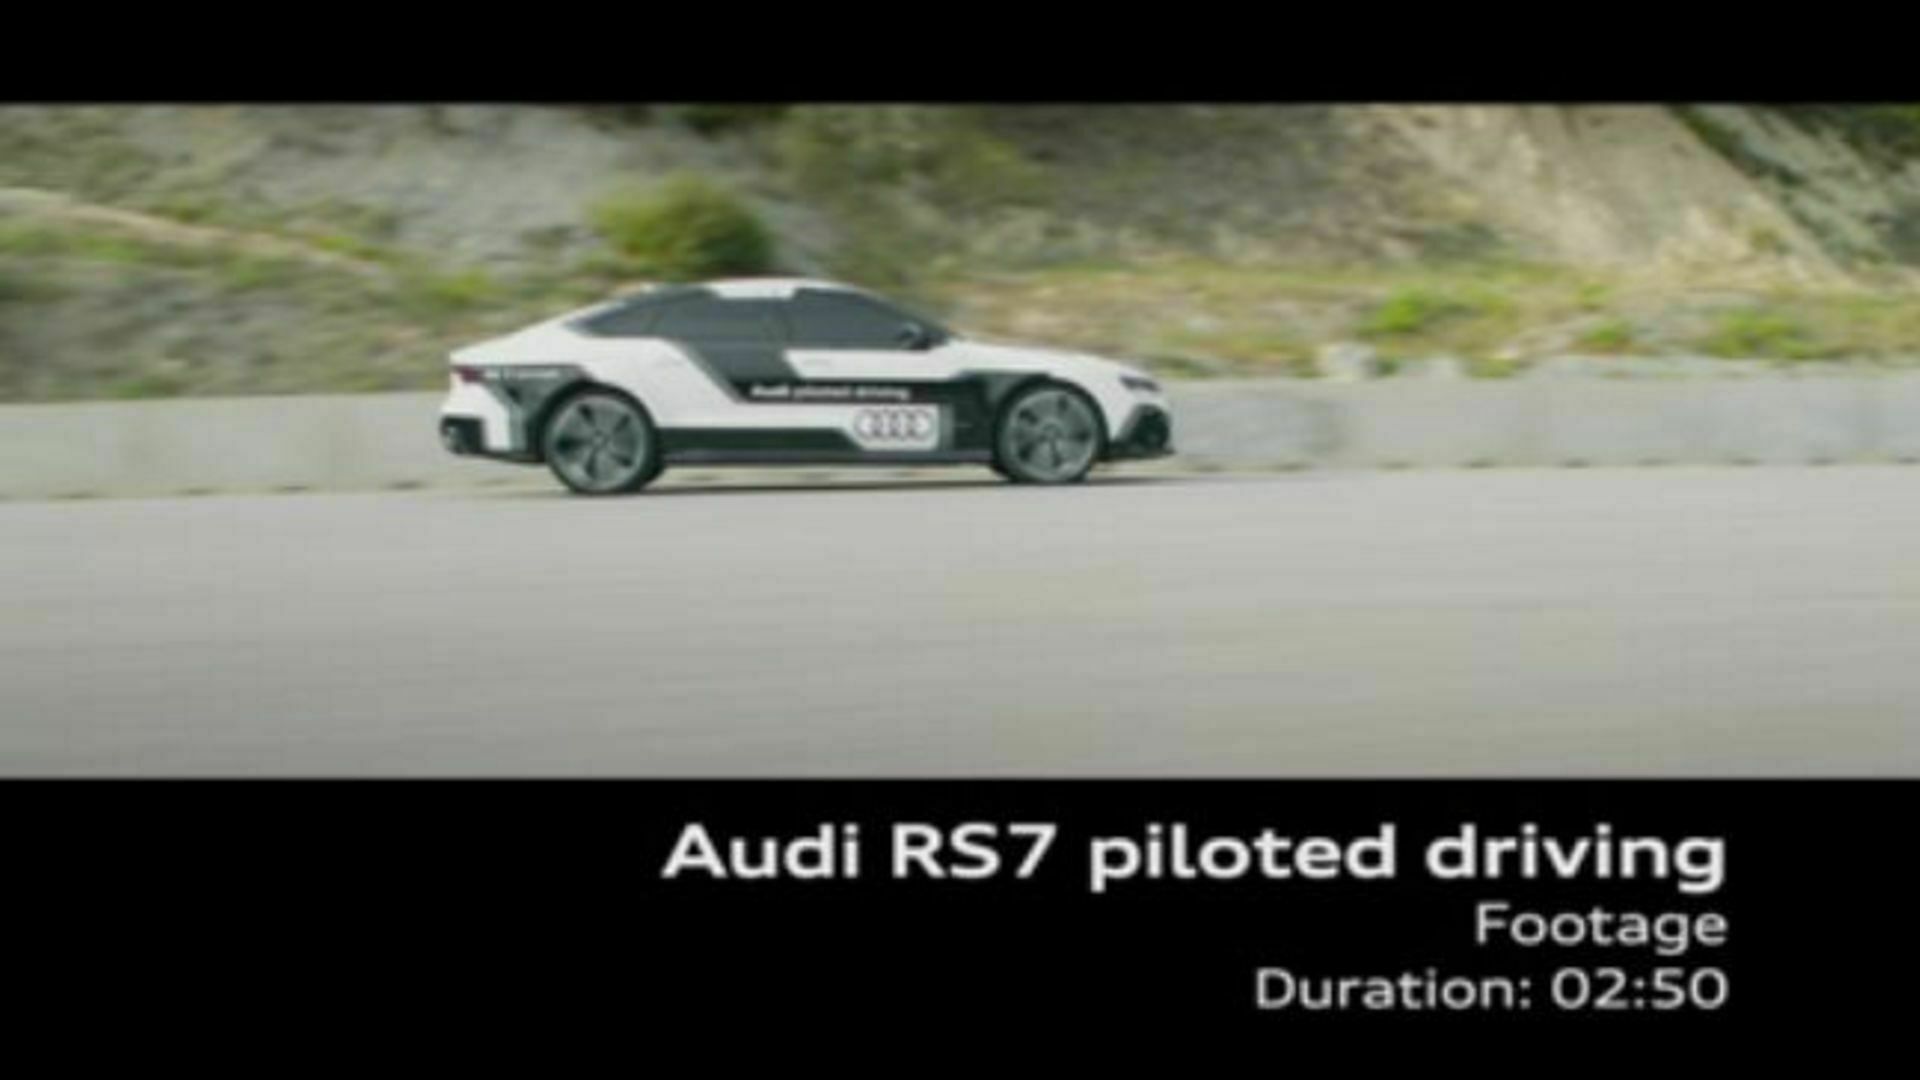 Audi RS 7 piloted driving concept - Footage Barcelona